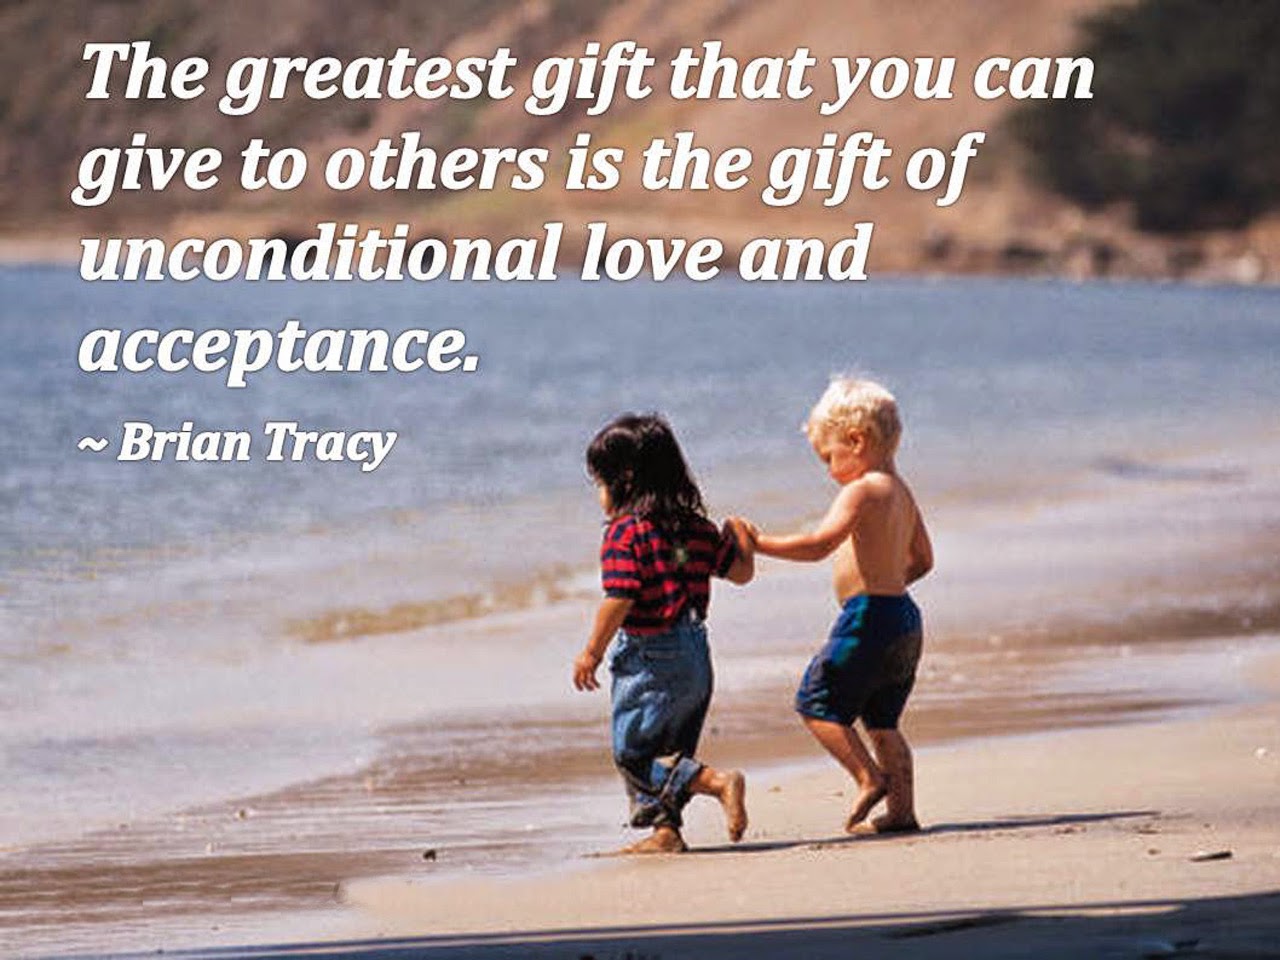 "The greatest t that you can give to others is the t of unconditional love